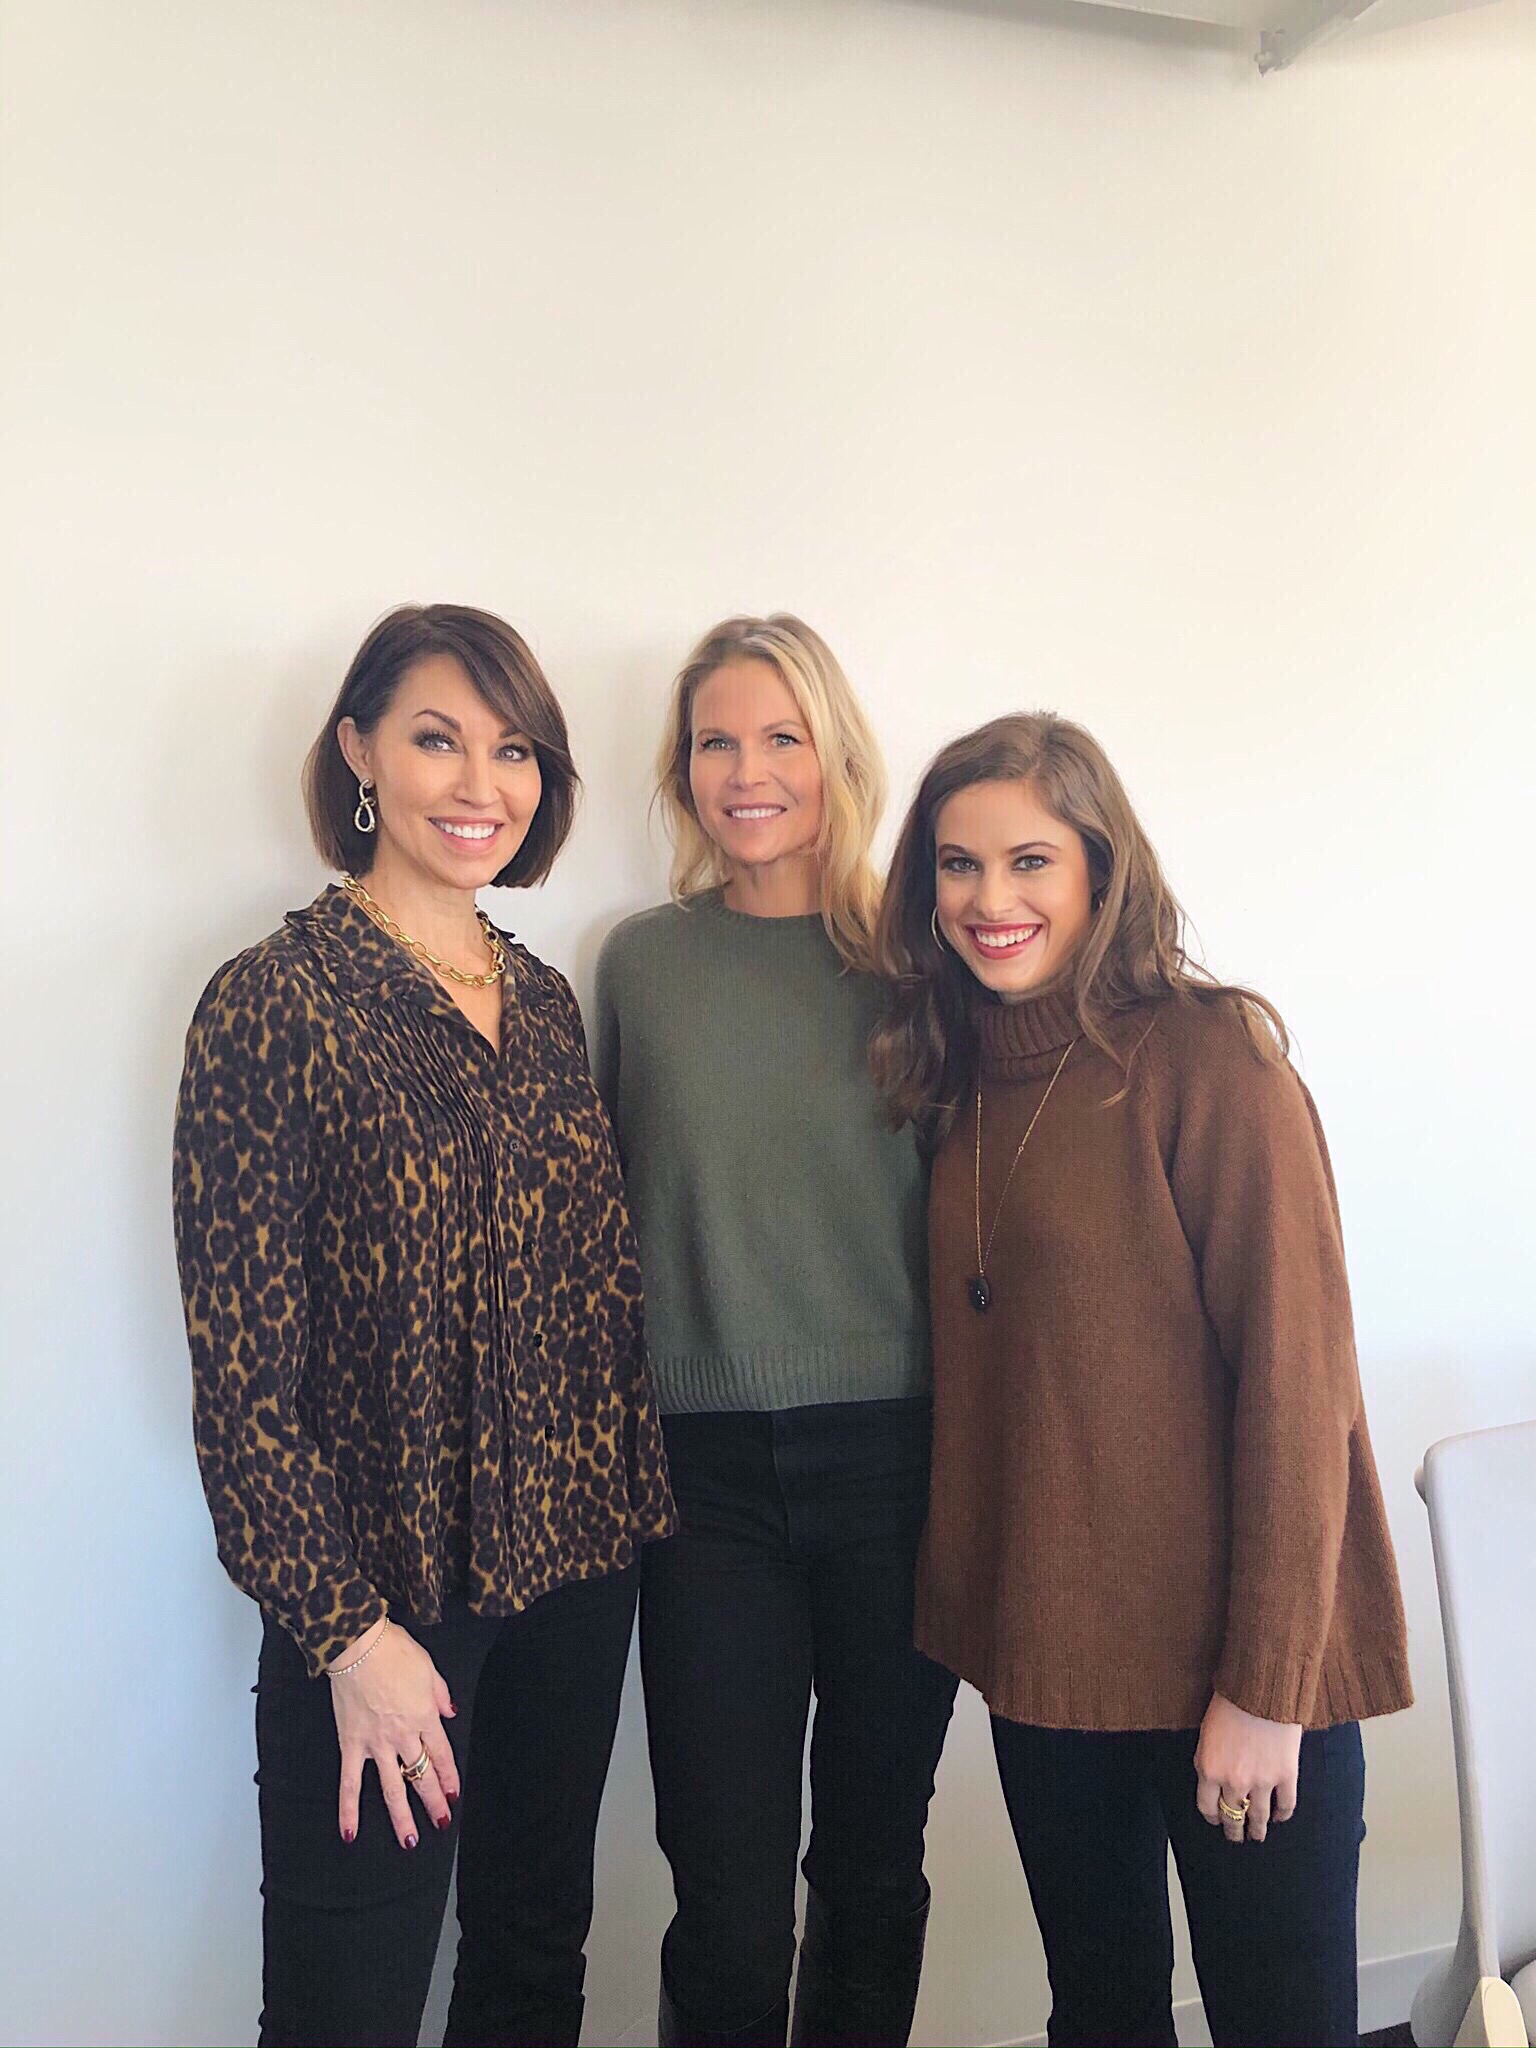 Three women: one wearing a long-sleeve leopard print top, one in a green sweater with blonde hair the last in a camel colored turtleneck sweater. The other two have brown hair